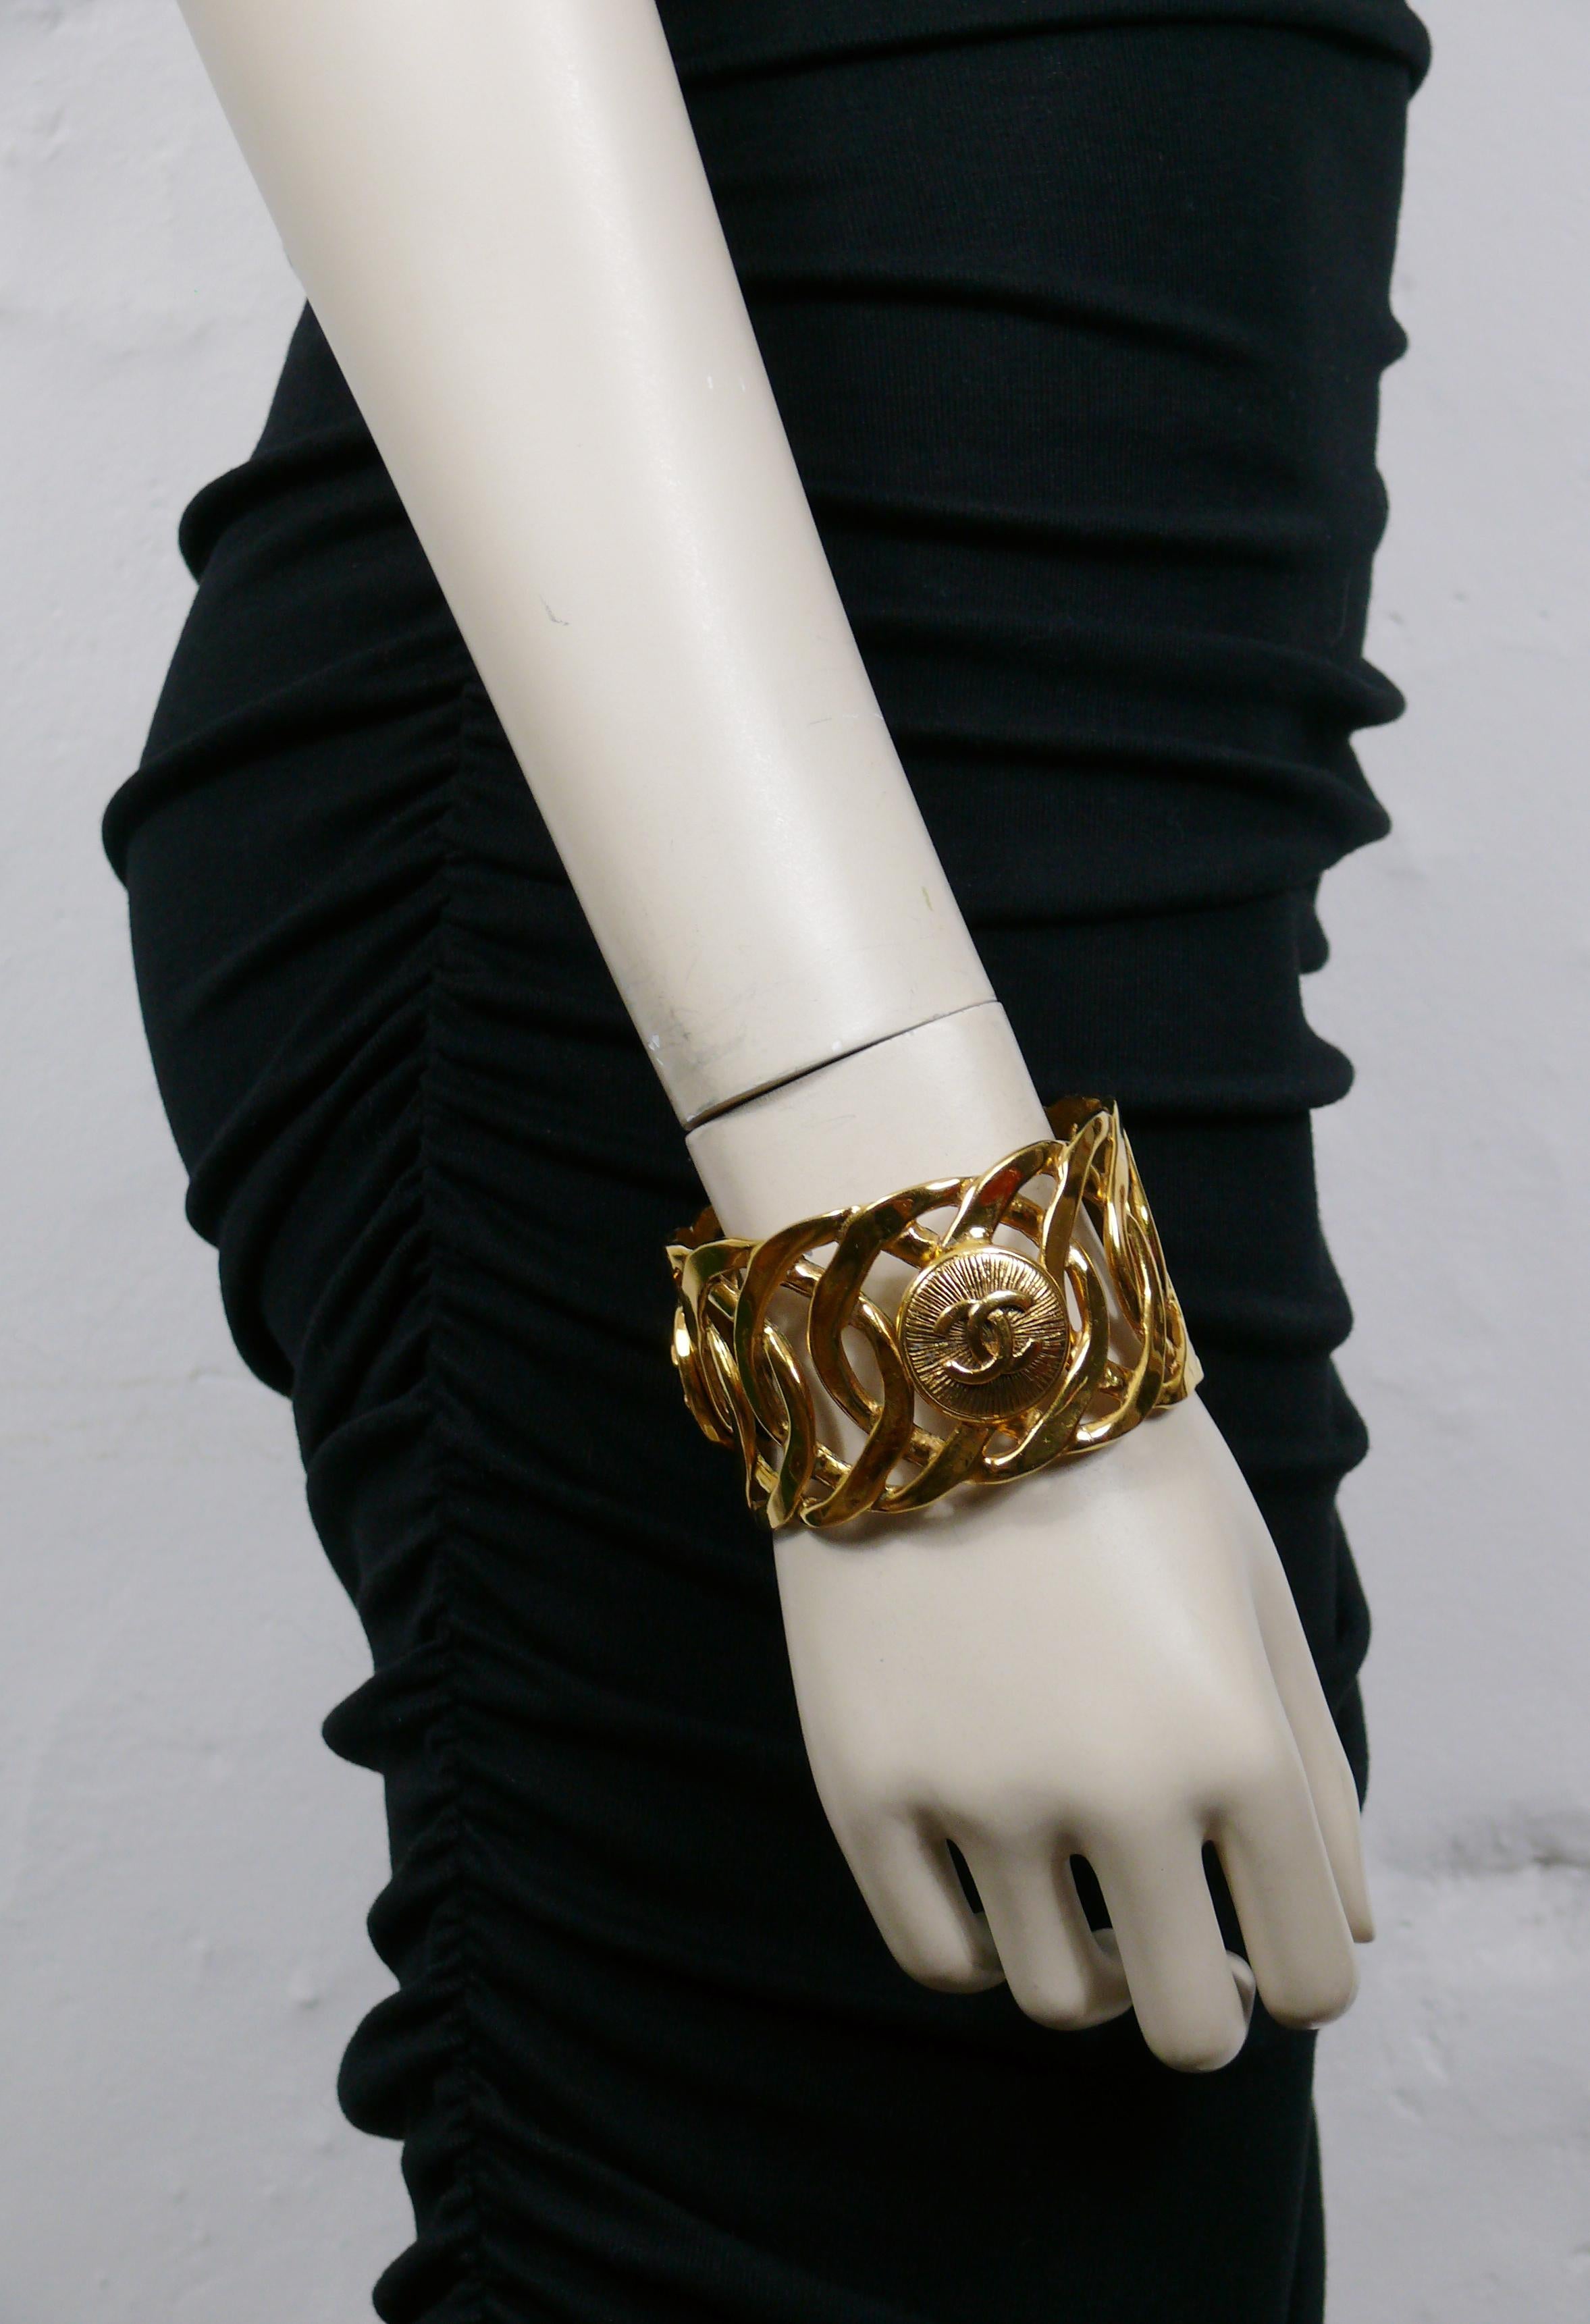 CHANEL vintage gold tone cuff bracelet featuring a rigid chain design embellished with 3 CC medallions.

Slips on (no clasp).

Embossed CHANEL Made in France.

Indicative measurements : inner circumference approx. 21.05 cm (8.29 inches) / width